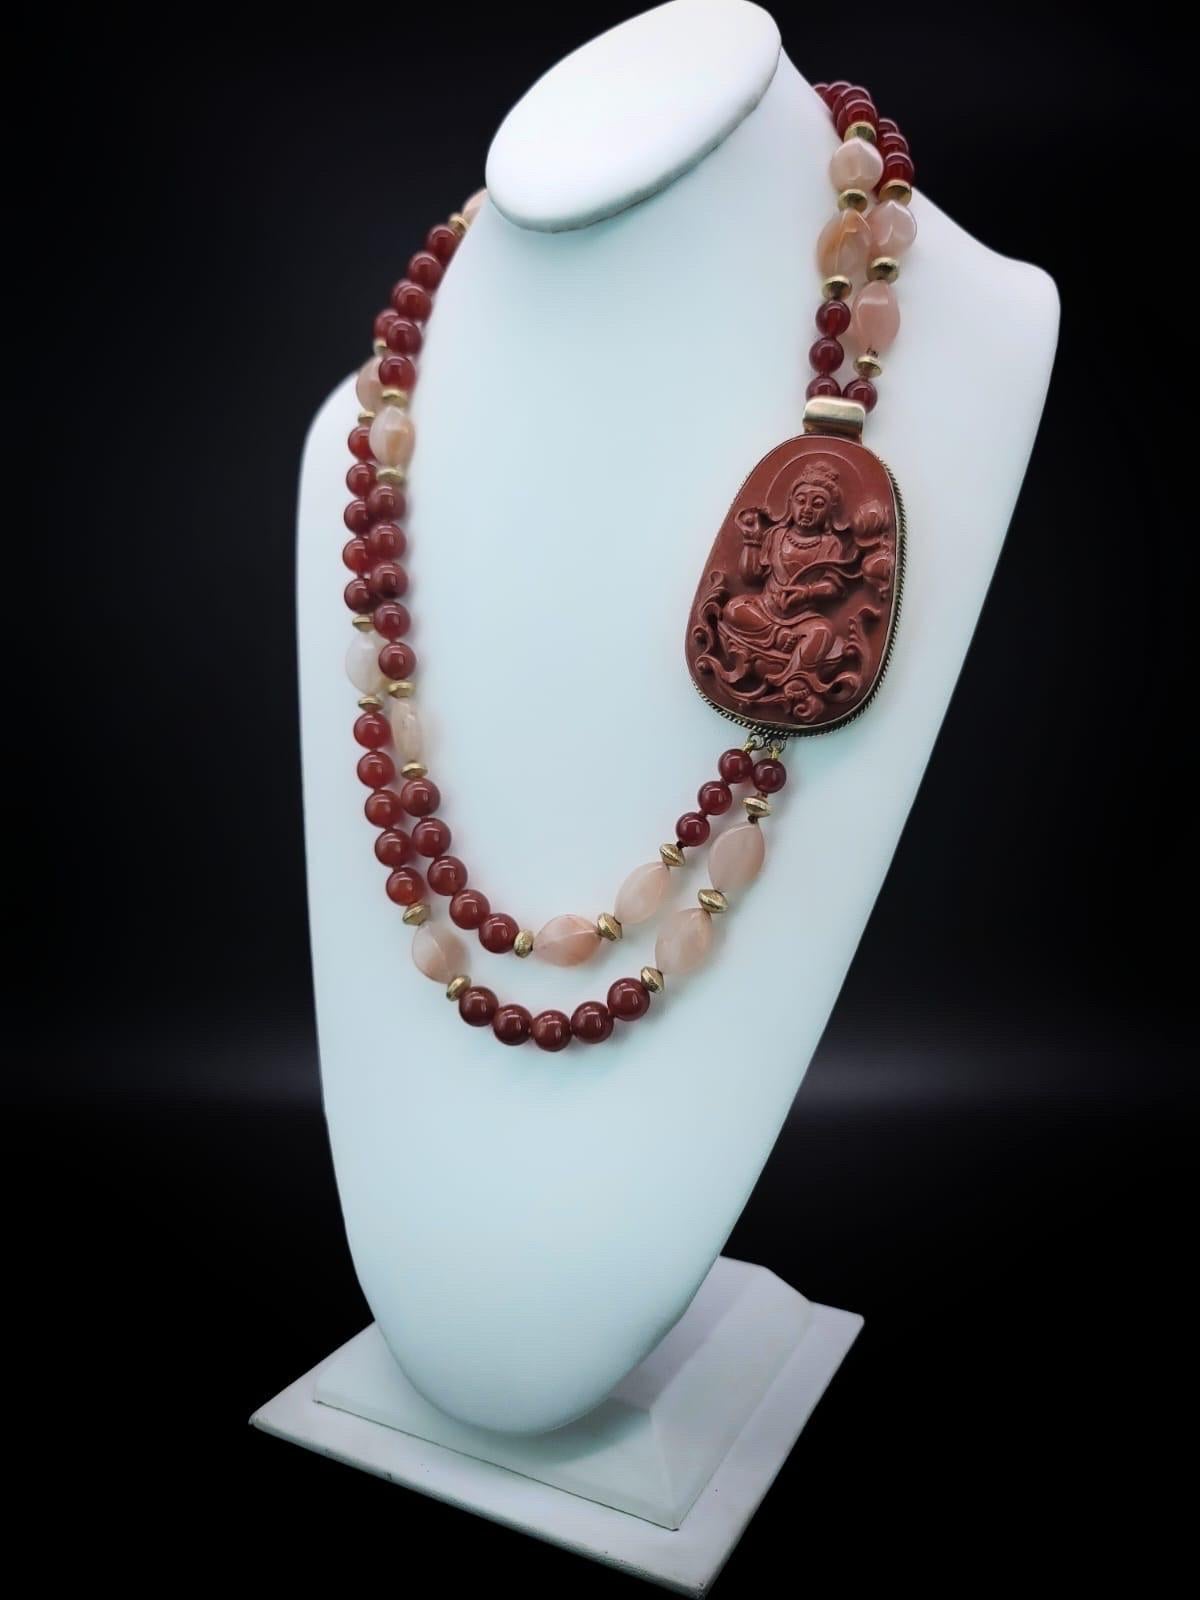 One-of-a-Kind

Carved Aventurine Buddha anchors Carnelian and Aventurine double strand matinee length necklace. 
A harmonious combination of rust-colored 10 m.m carnelian beads interspersed with creamy peach Aventurine. Accented with vermeil